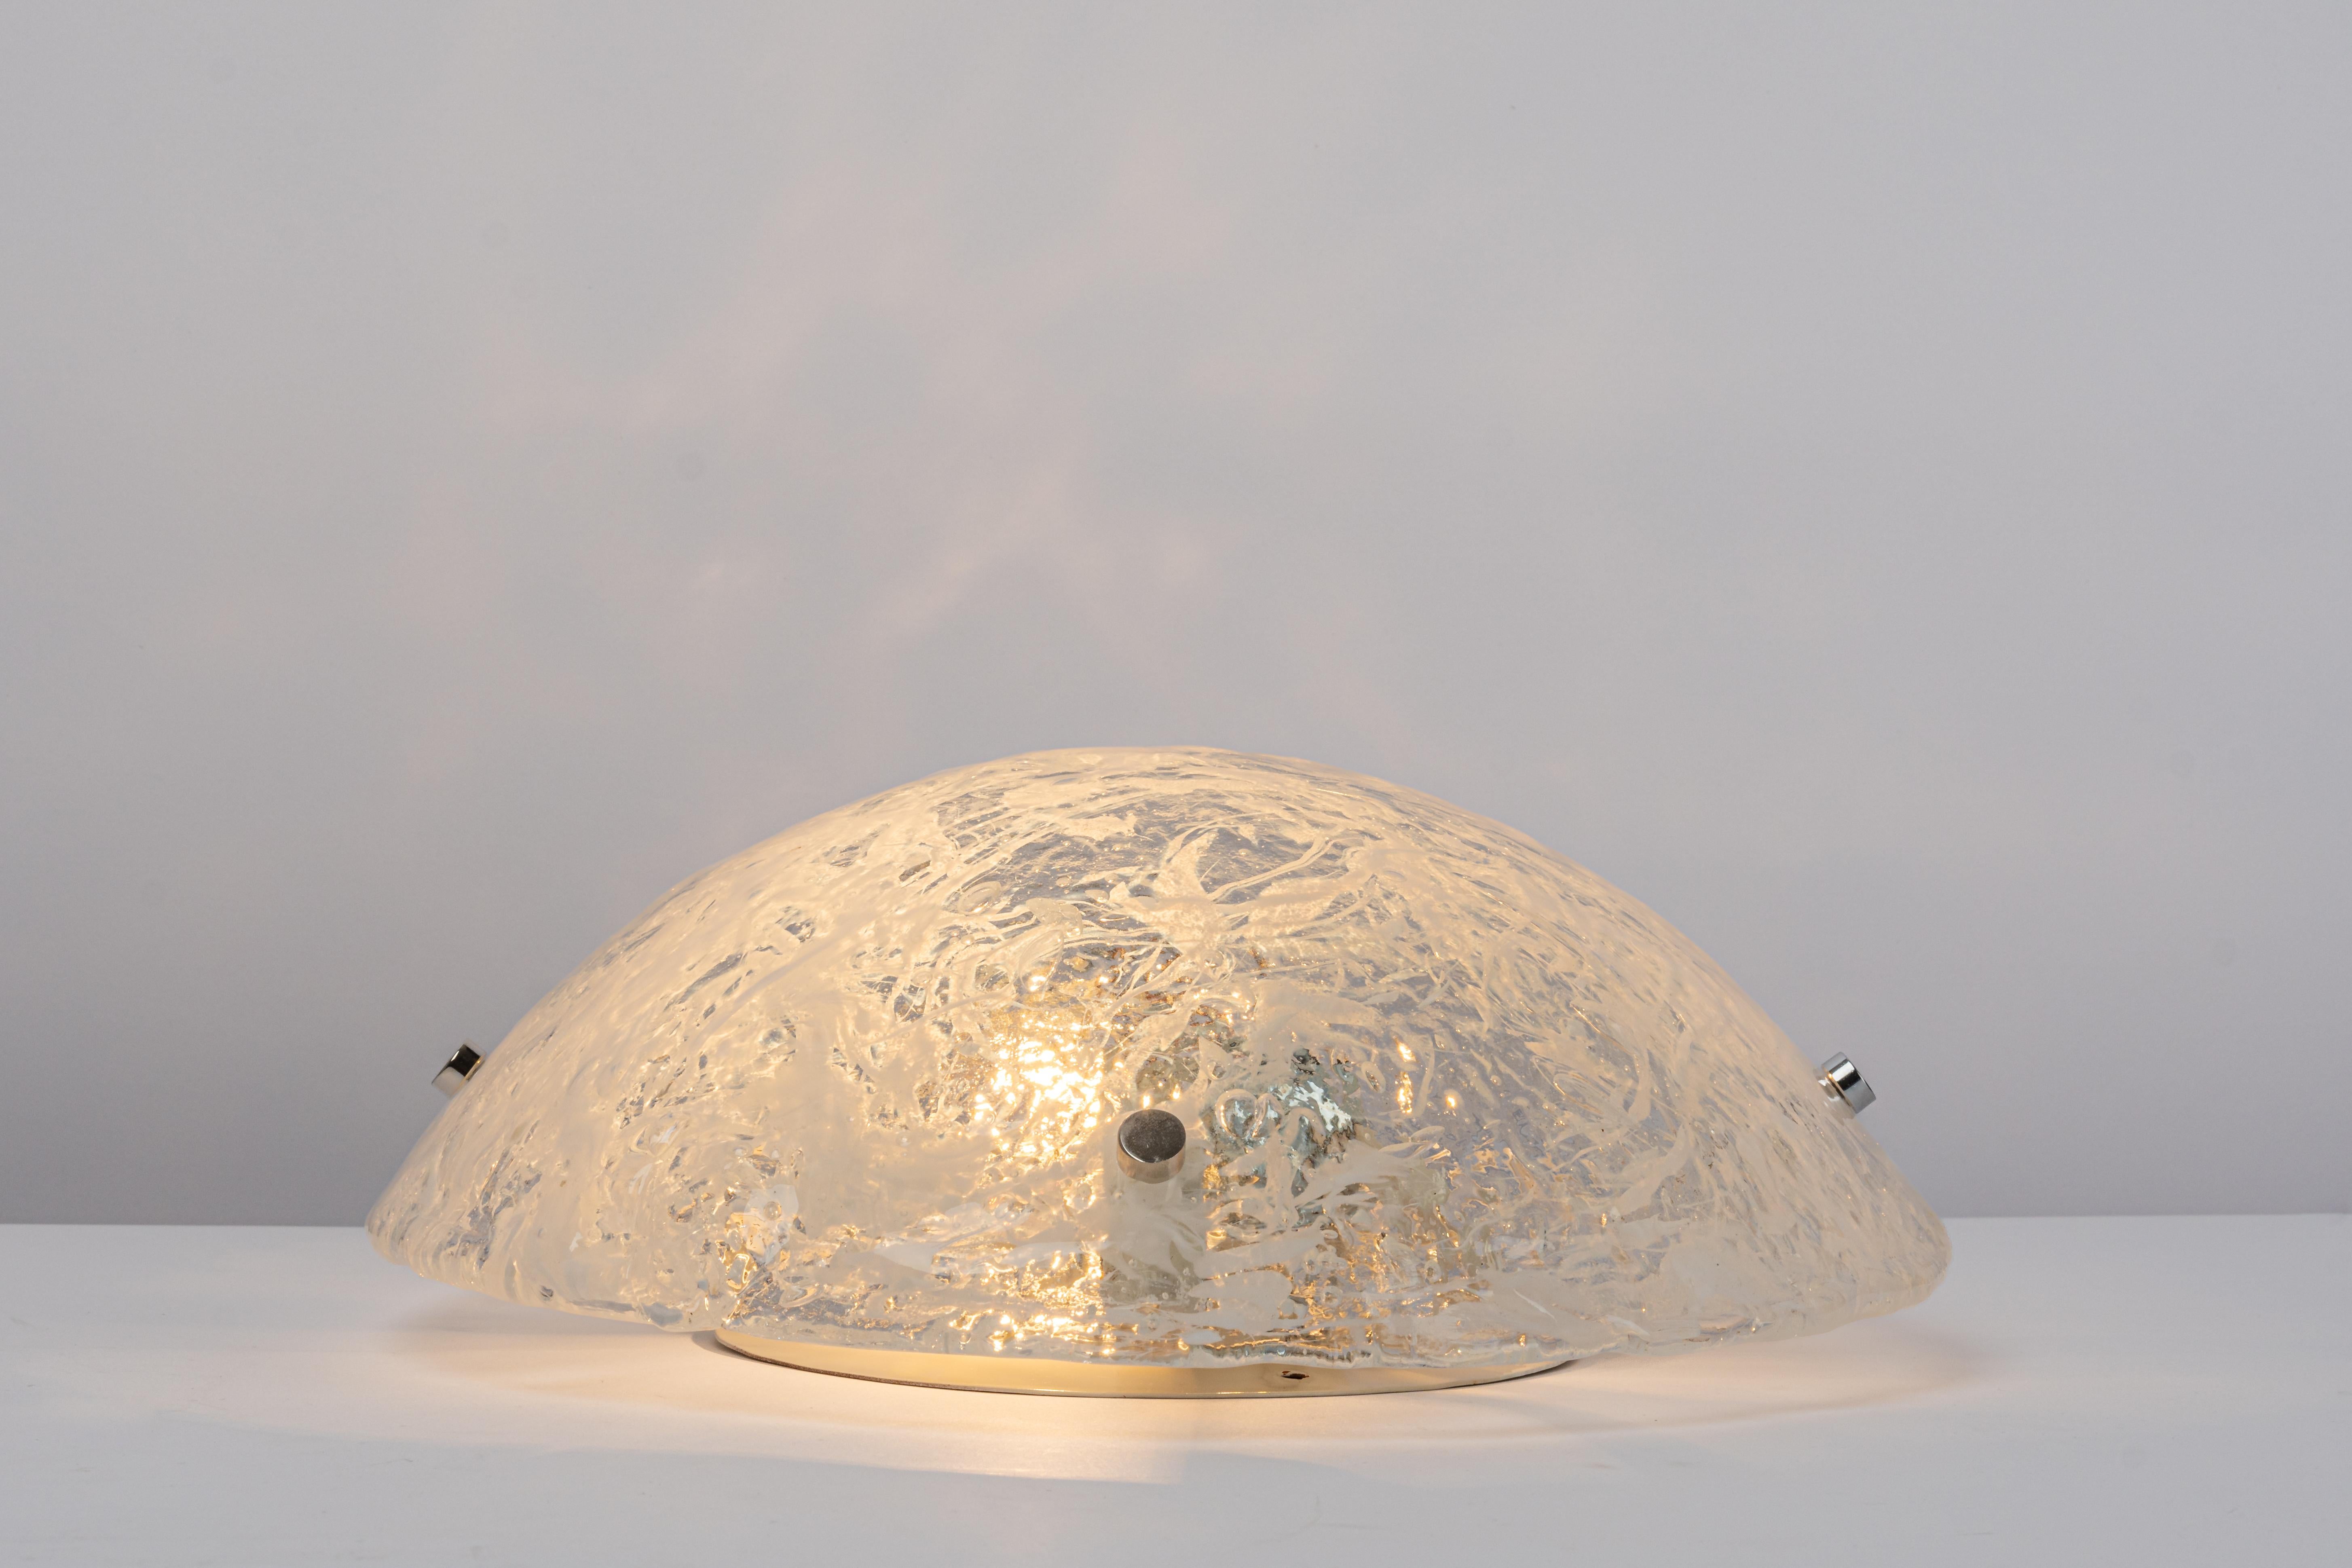 Mid-Century Modern 1 of 2 Large Venini Ceiling Lights Attributed to Carlo Scarpa for Venini, 1950s For Sale